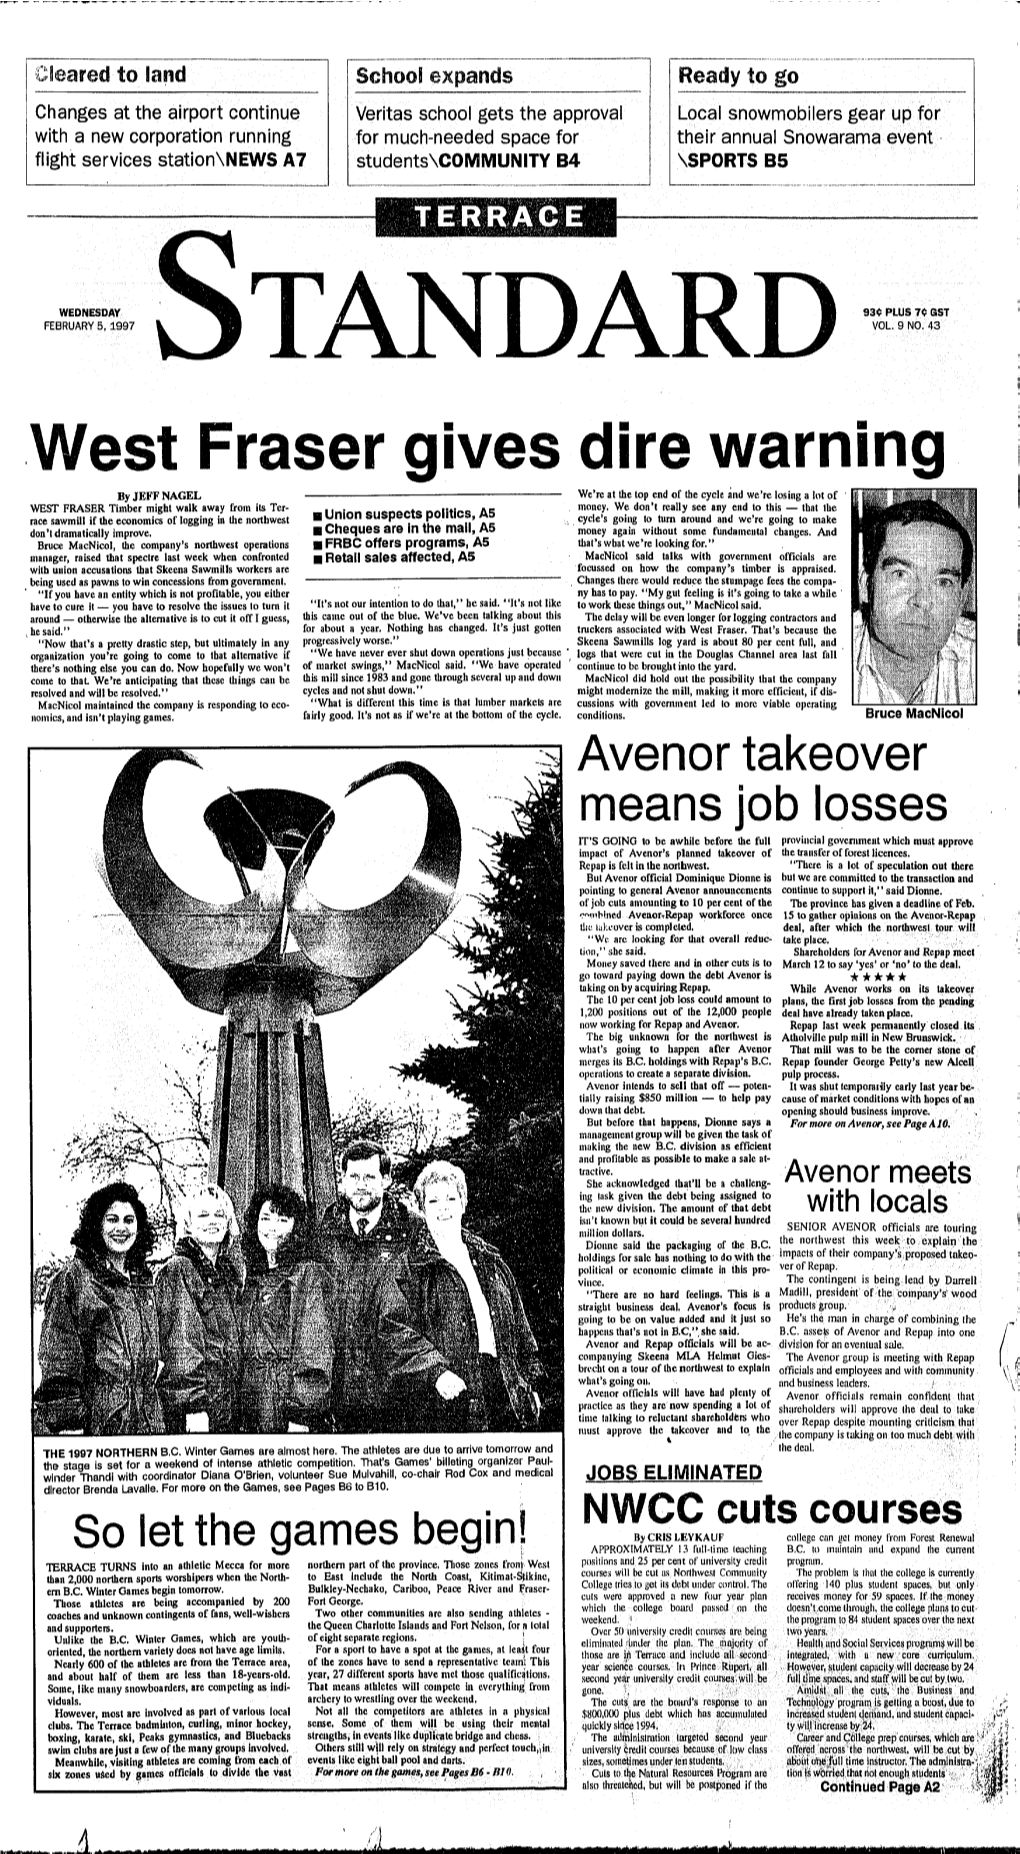 West Fraser Gives Dire Warning by JEFF NAGEL We're at the Top End of the Cycle and We're Losing a Lot of WEST FRASER Timber Might Walk Away from Its Ter- Money